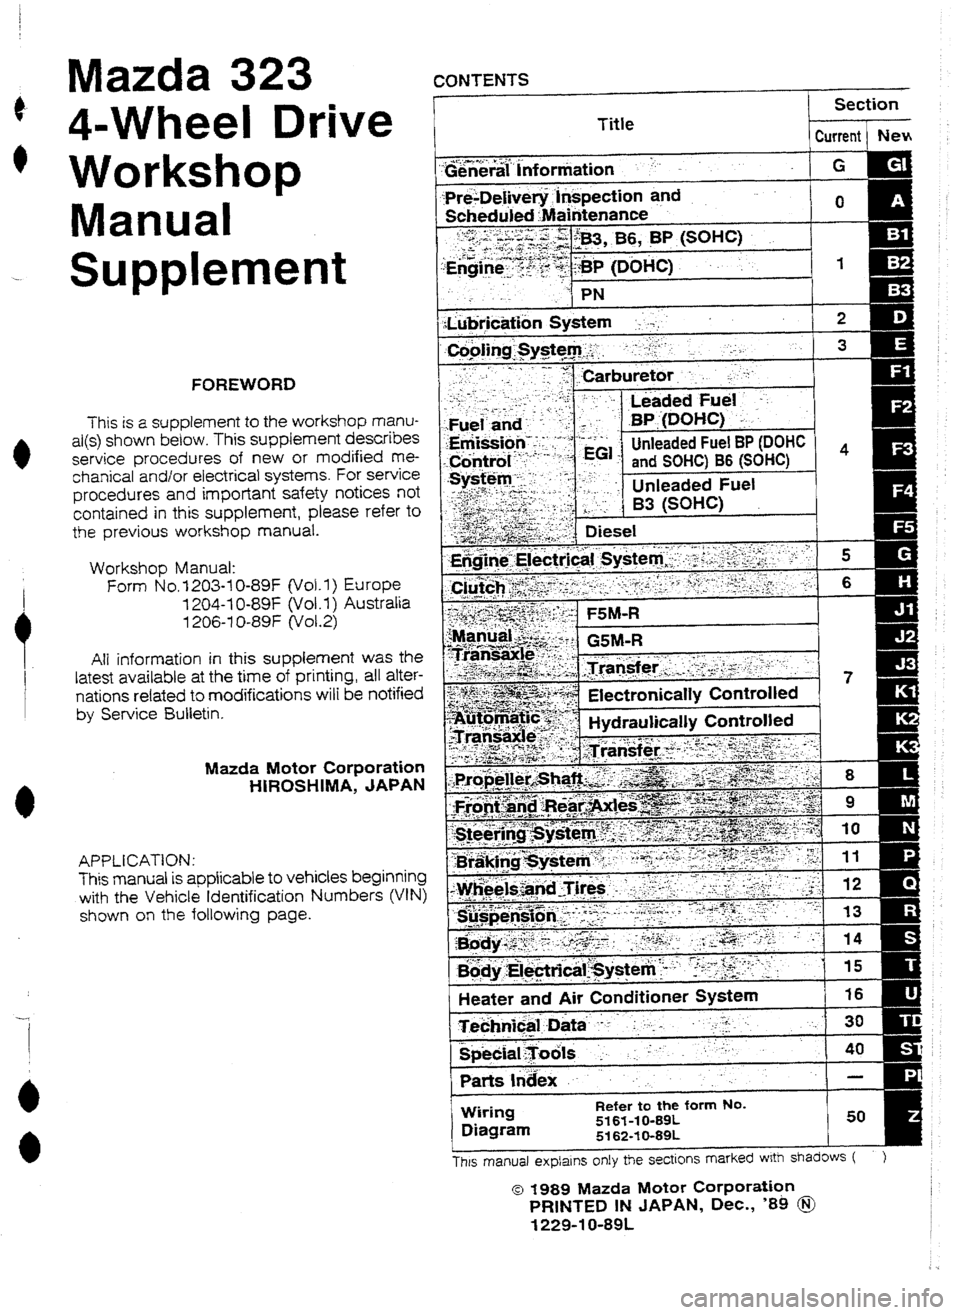 MAZDA 232 1990  Workshop Manual Suplement Mazda 323 
4-Wheel Drive 
Workshop 
Manual CONTENTS 
Title Section 
Current ) NeH 
Supplement 
FOREWORD 
This is a supplement to the workshop manu- 
al(s) shown below. This supplement describes 
servi